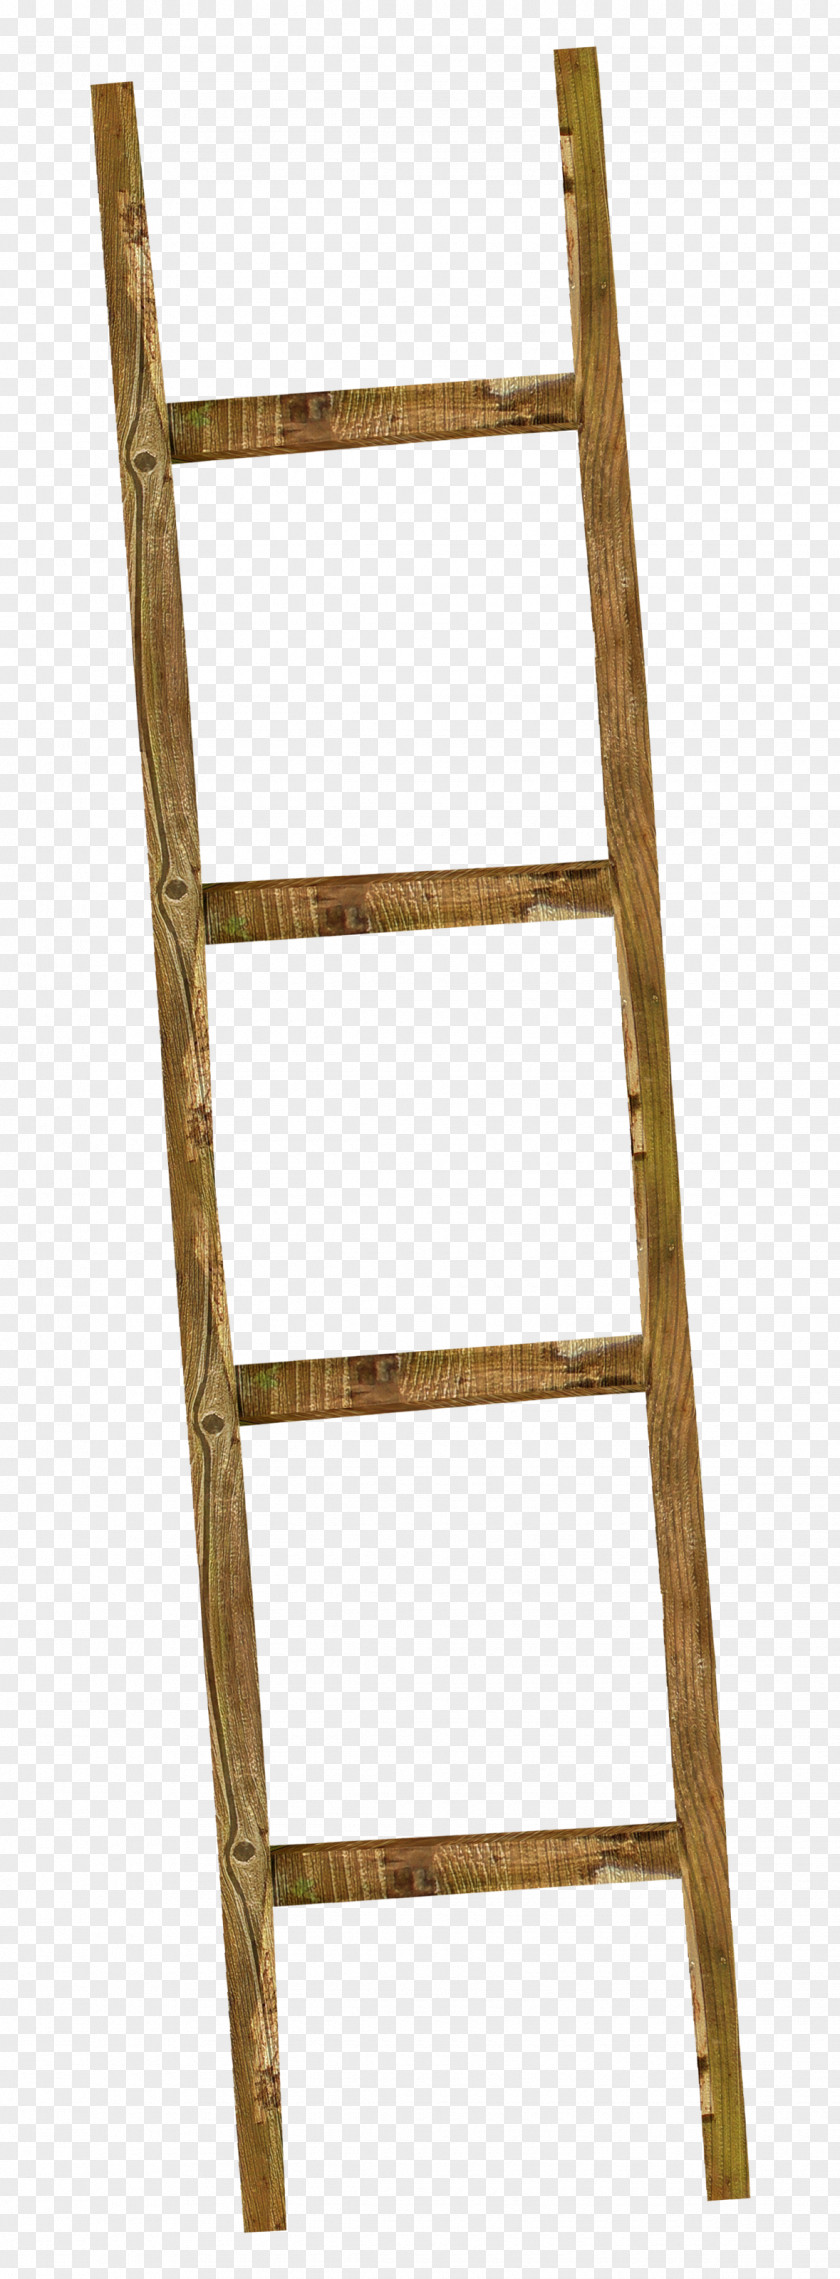 Brown Wooden Ladder Stairs Wood Clip Art PNG